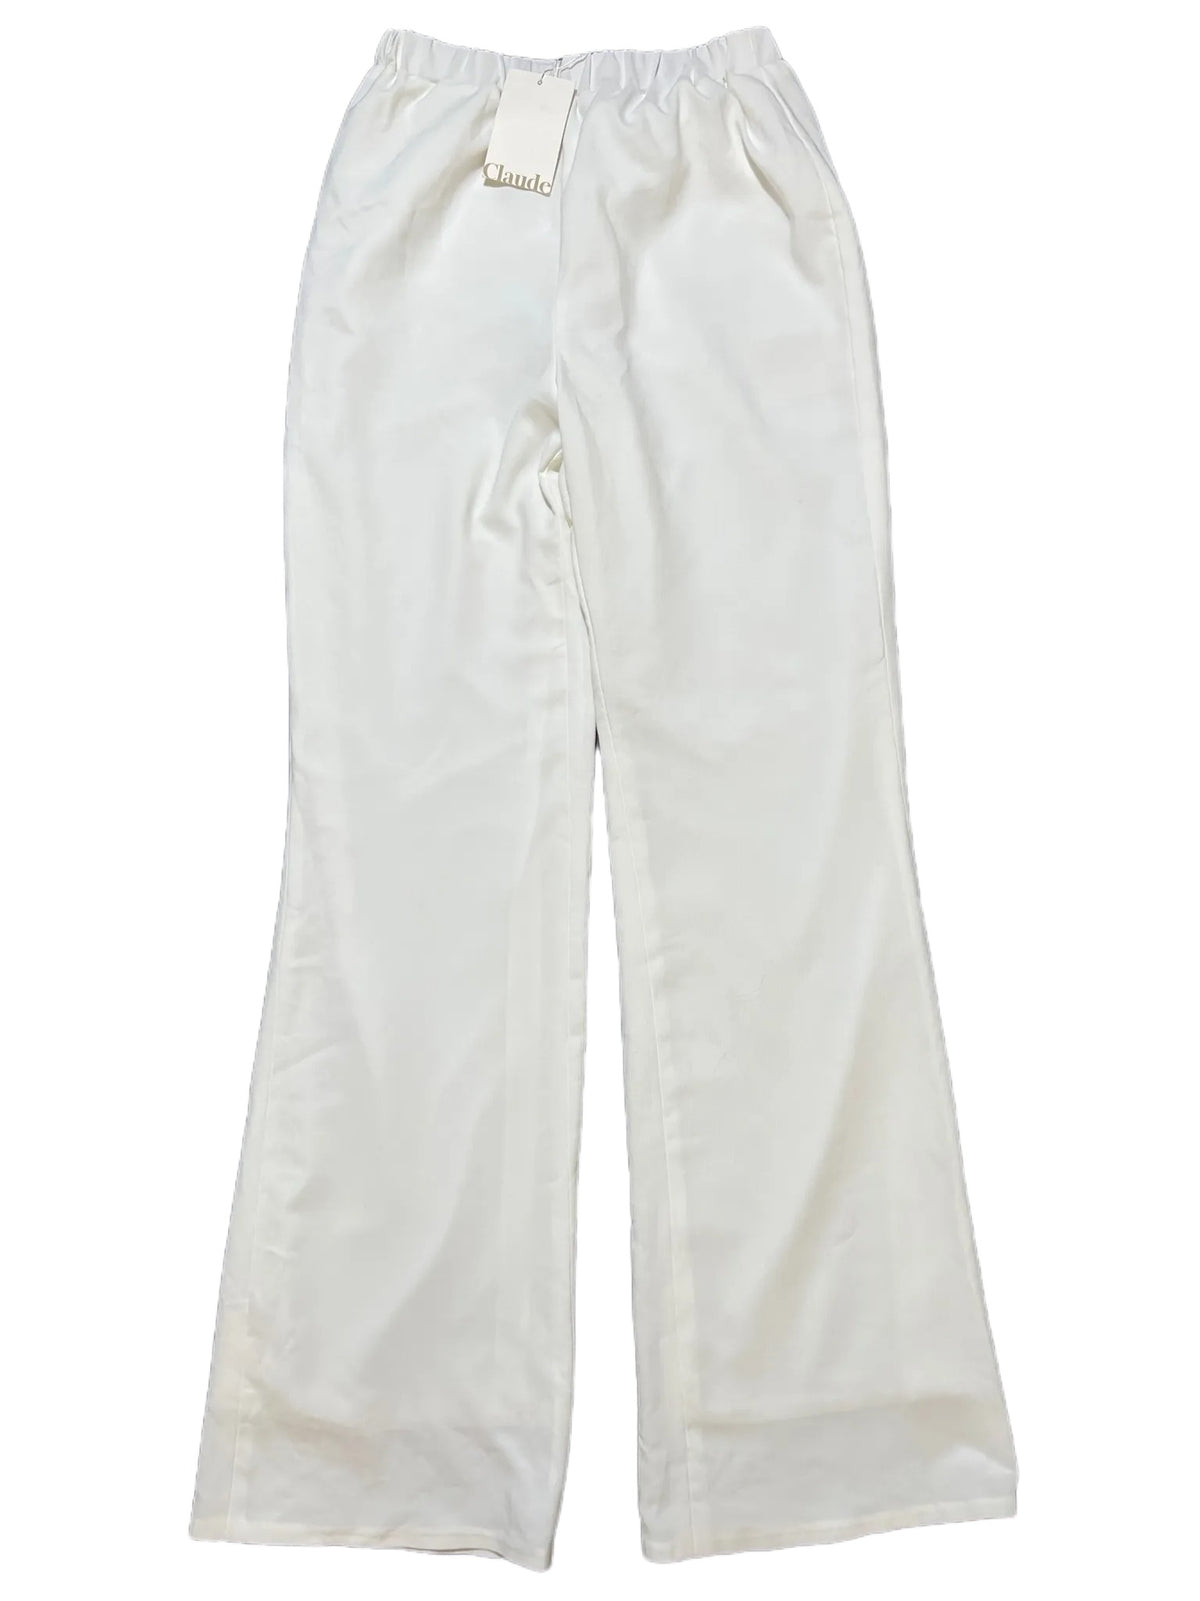 Claude- White Straight Leg Pants NEW WITH TAGS